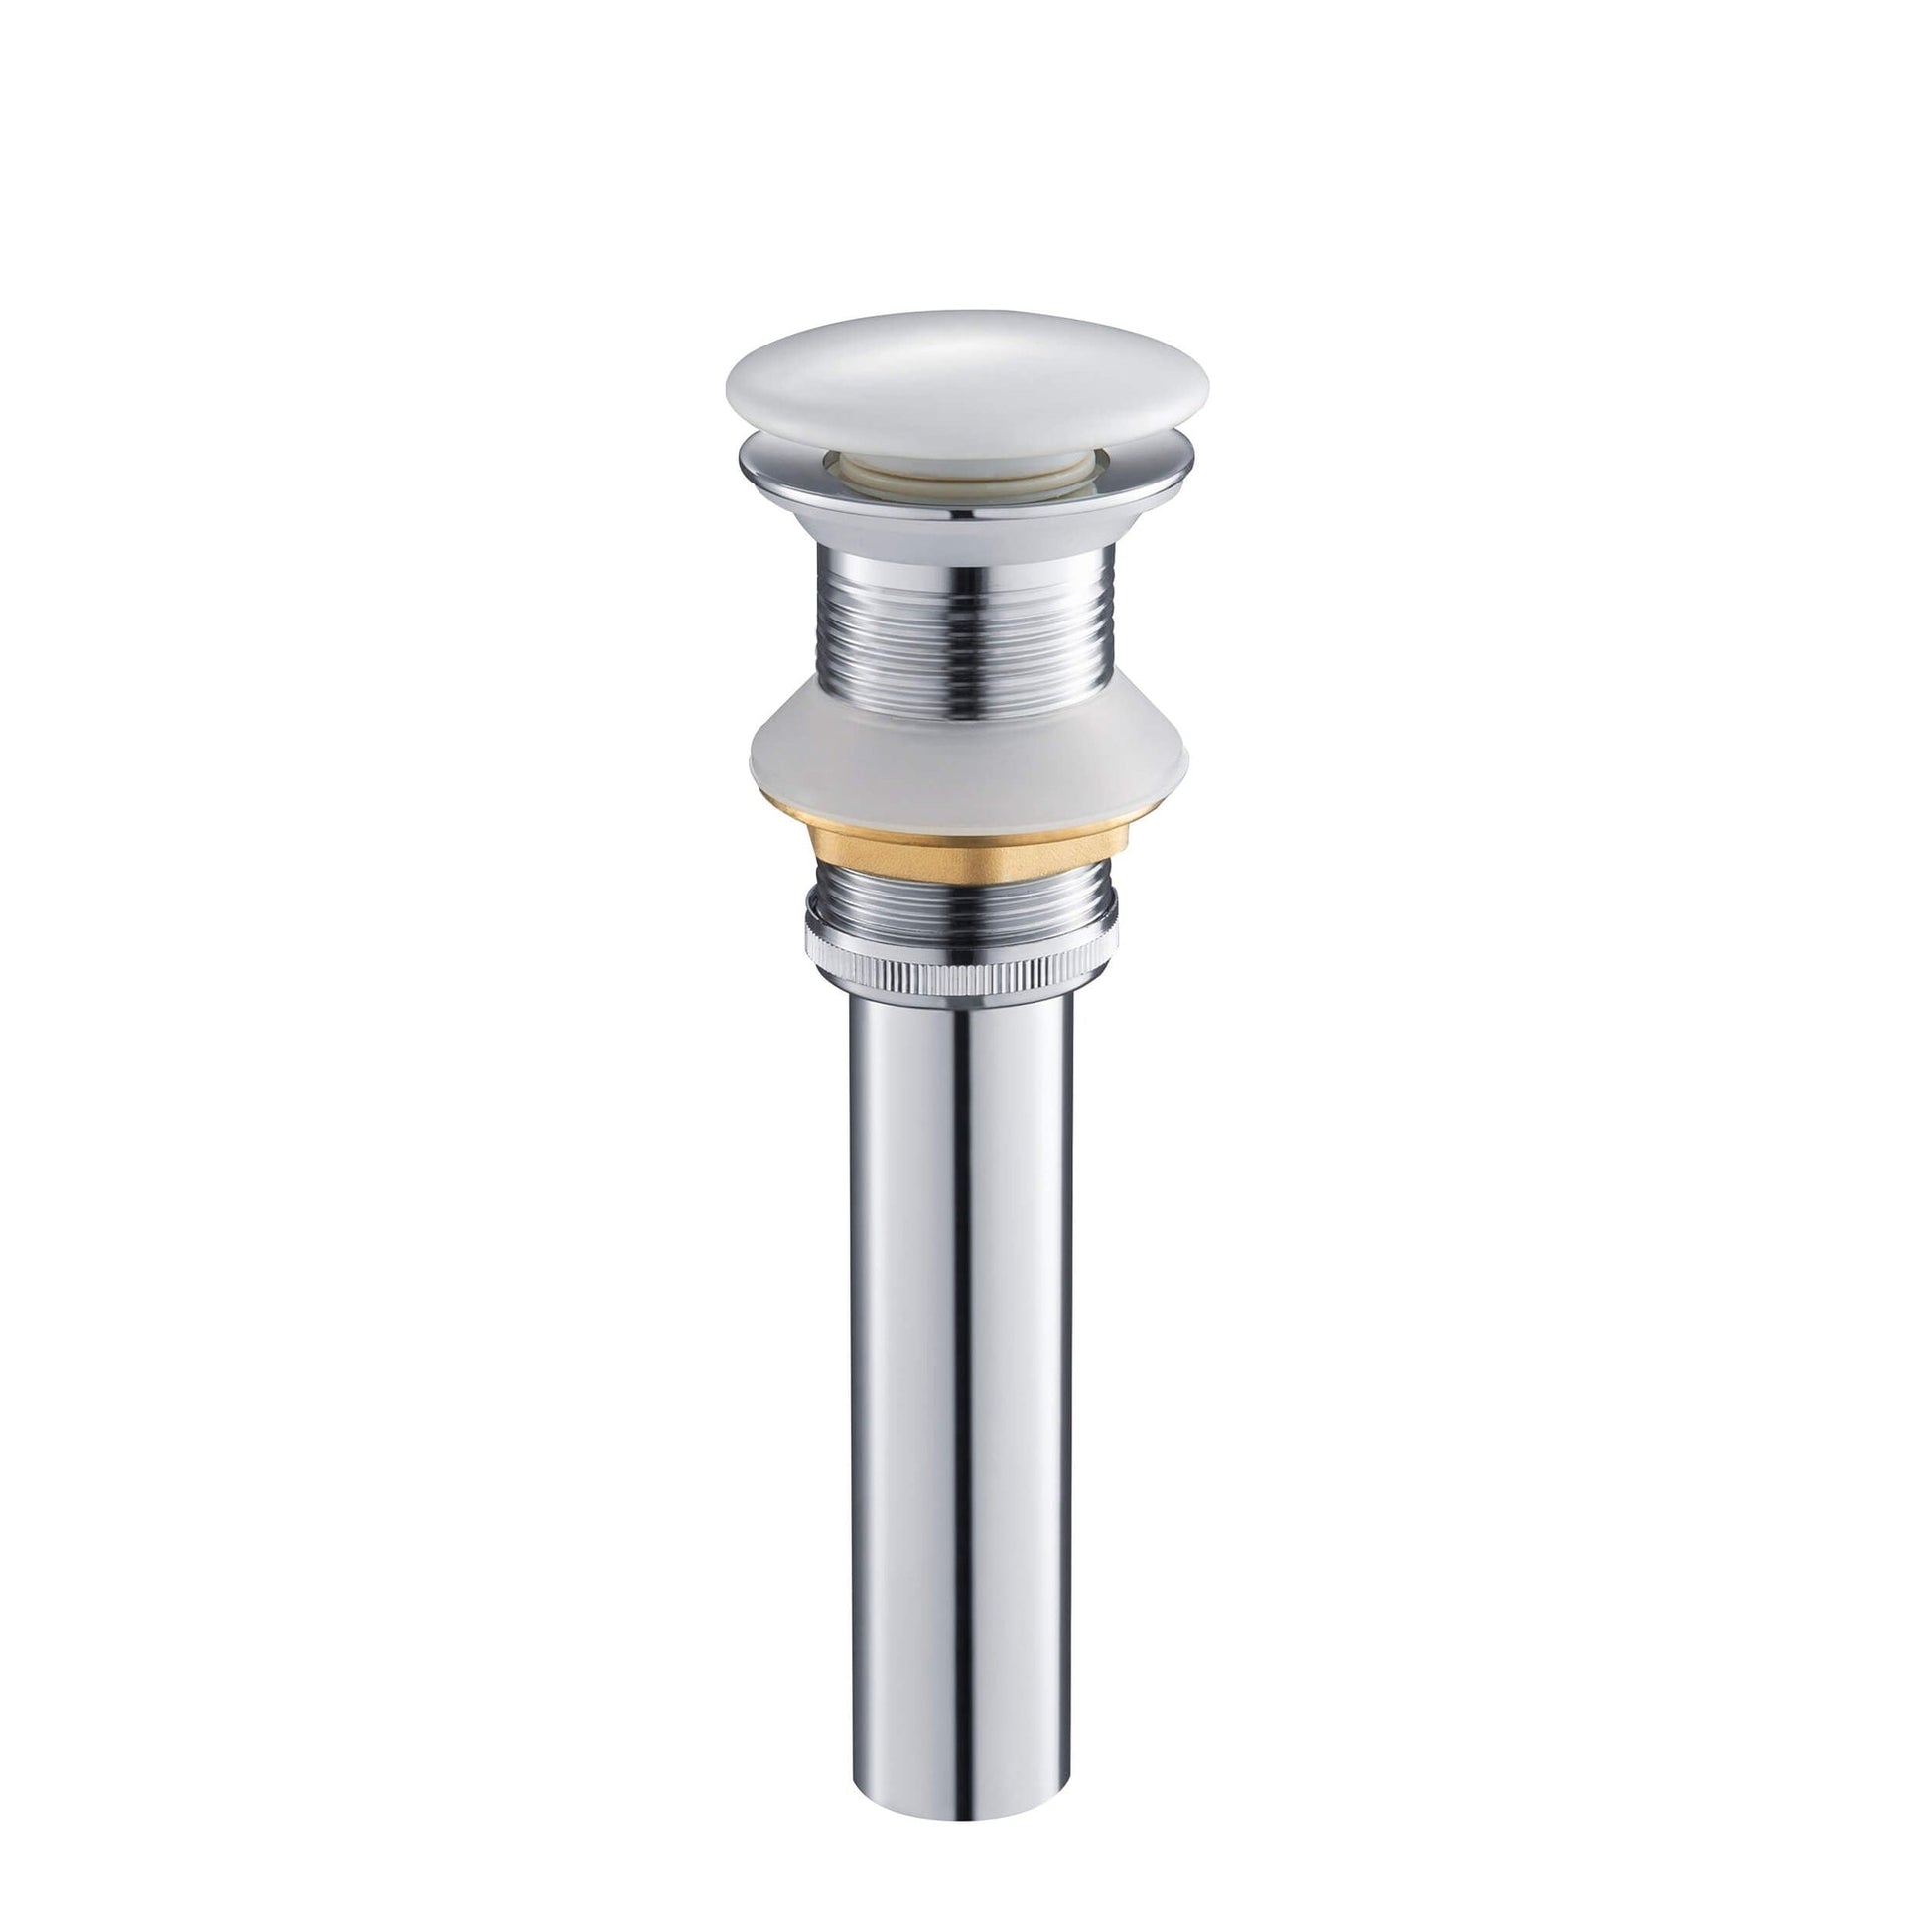 KIBI Brass Bathroom Vessel Sink Pop-Up Drain Stopper Full Cover Without Overflow in Ceramic White Finish